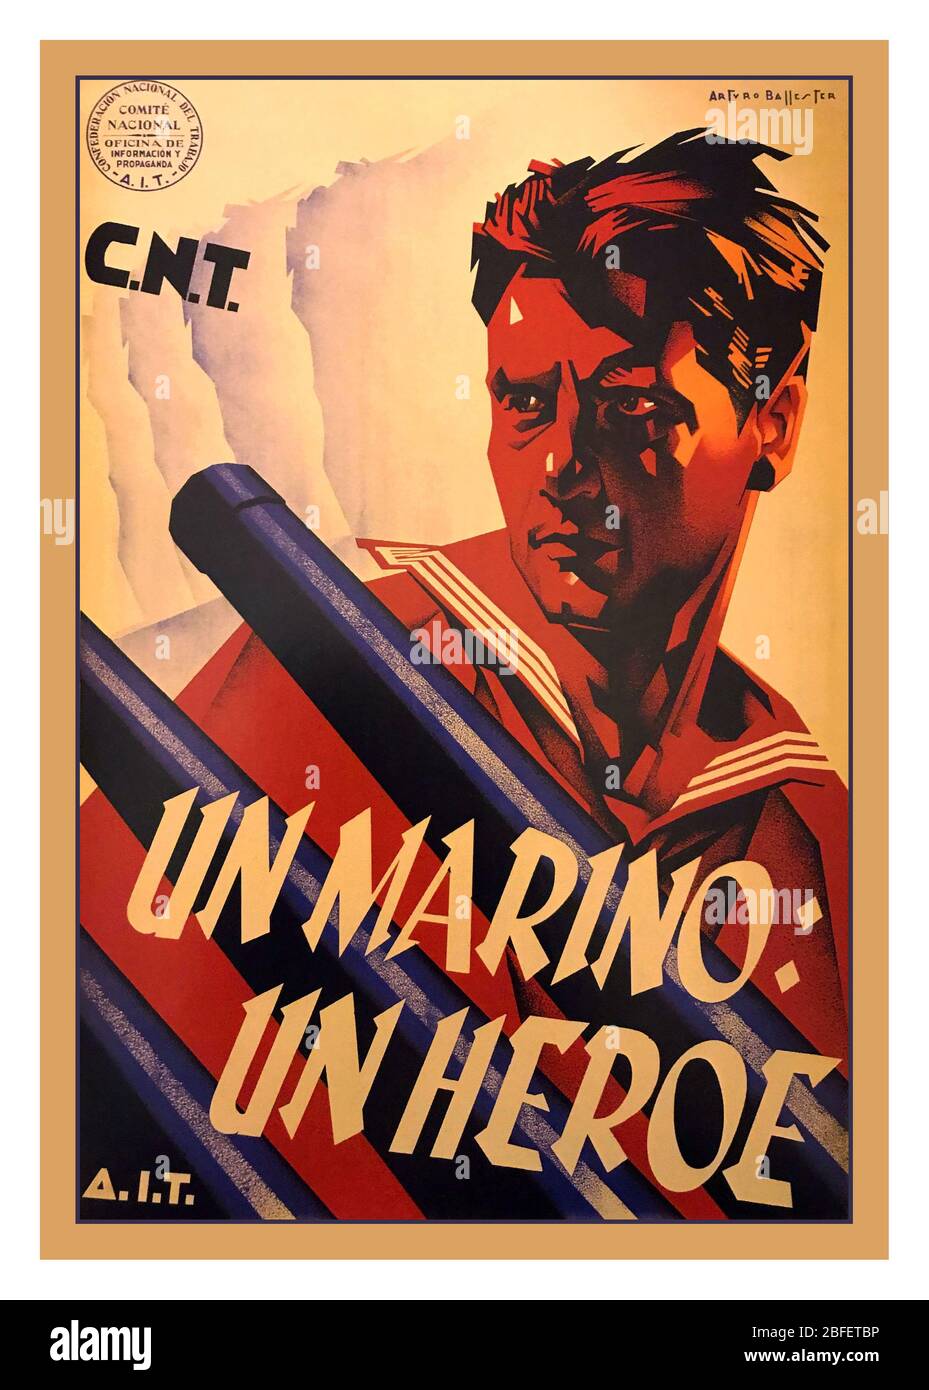 Vintage CNT 1930’s propaganda poster for the Spanish Civil War “A sailor a hero” (C.N.T civil war poster 1936) The Spanish Civil War (Spanish: Guerra Civil Española) a civil war in Spain fought from 1936 to 1939. Republicans loyal to the left-leaning Second Spanish Republic, in alliance with anarchists, of the communist and syndicalist variety, fought against a revolt by the Nationalists, an alliance of Falangists, monarchists, conservatives and Catholics, led by a military group among whom General Francisco Franco soon achieved a preponderant role. .Confederación Nacional del Trabajo CNT Stock Photo